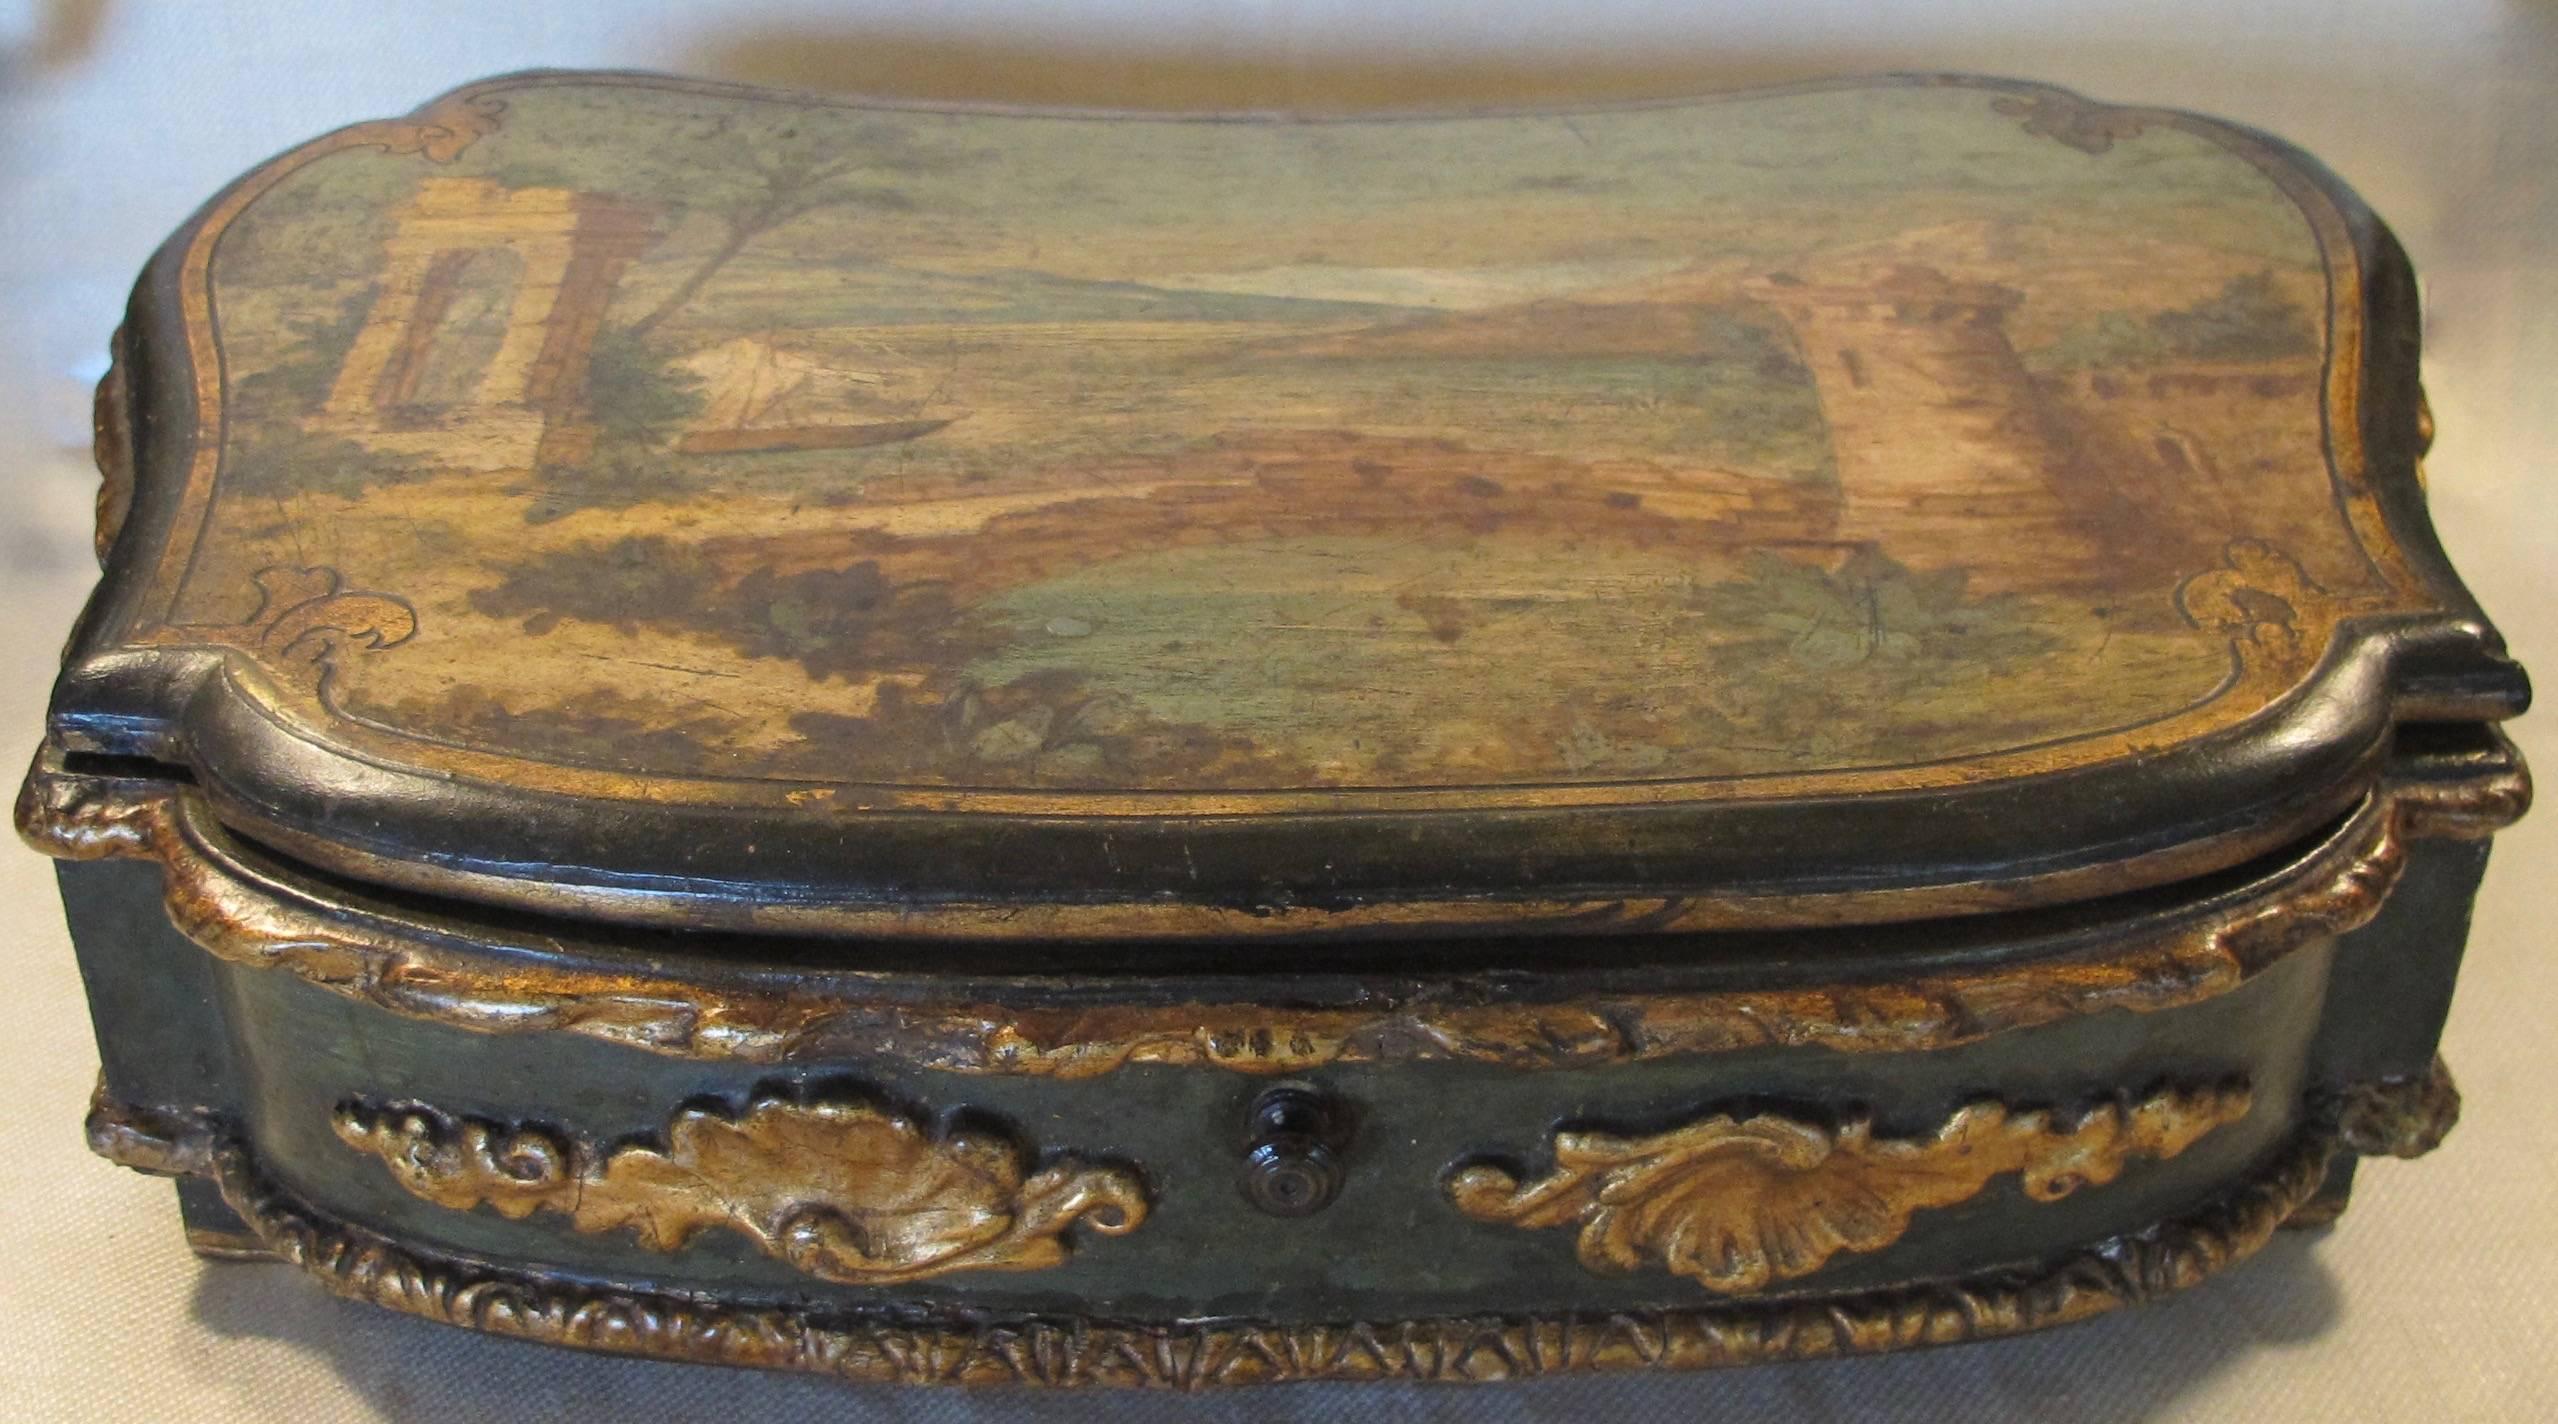 Wonderful kidney shaped box, hand-painted on the exterior top and decoupage and hand painted inside the lift up top, four separated compartments decoupaged. With gilt shell and twisted cord moulding around the edges. English or Continental late